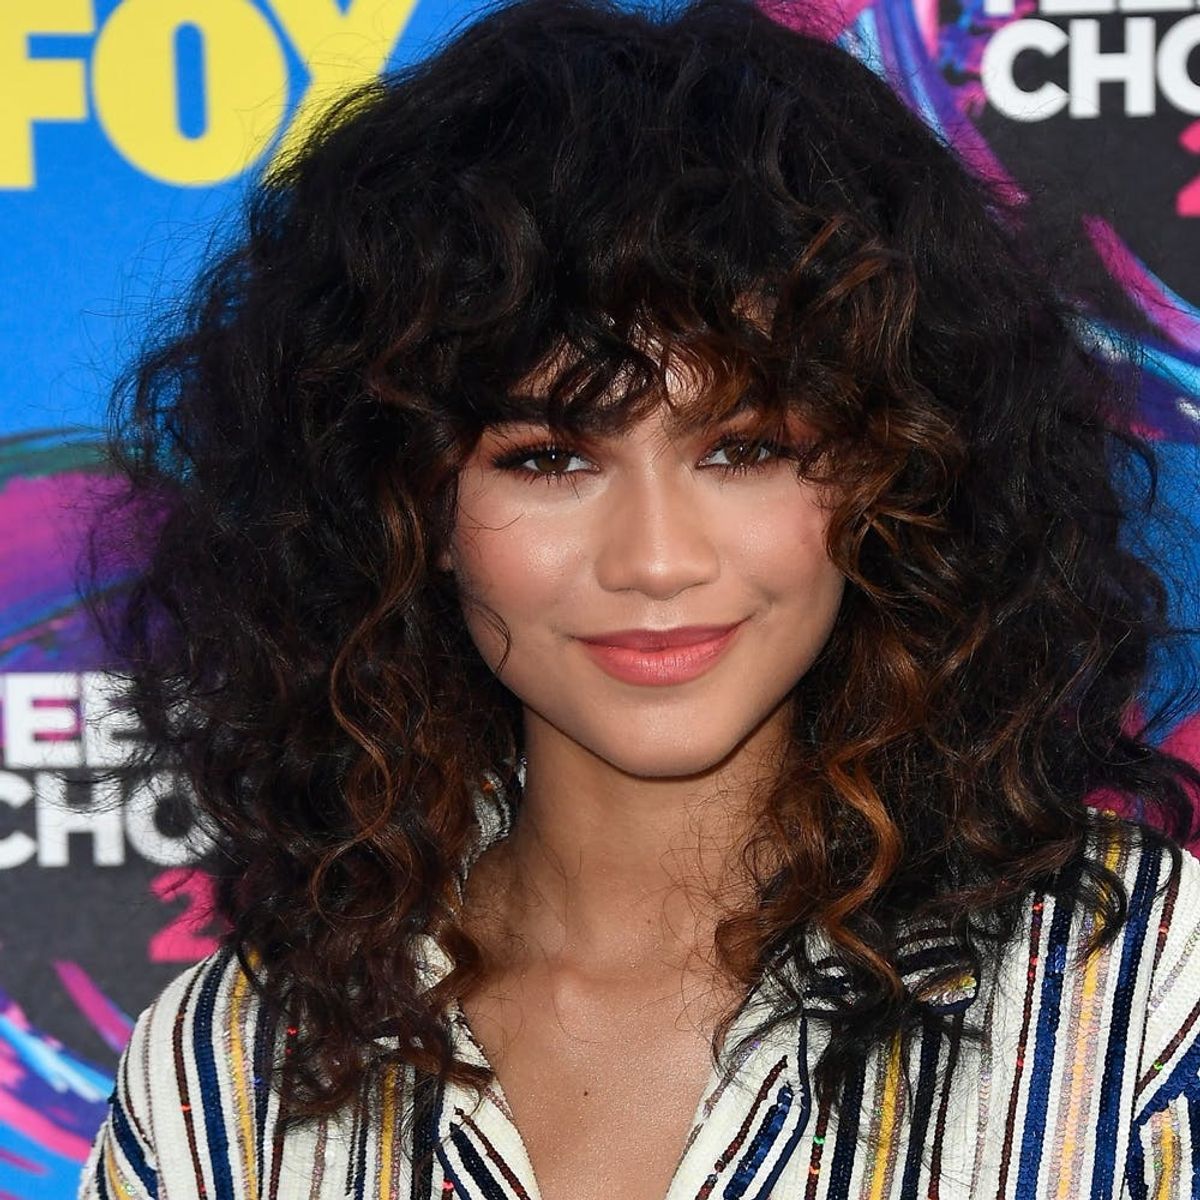 Zendaya Didn’t Drink a Drop for Her 21st Birthday: Here’s Why